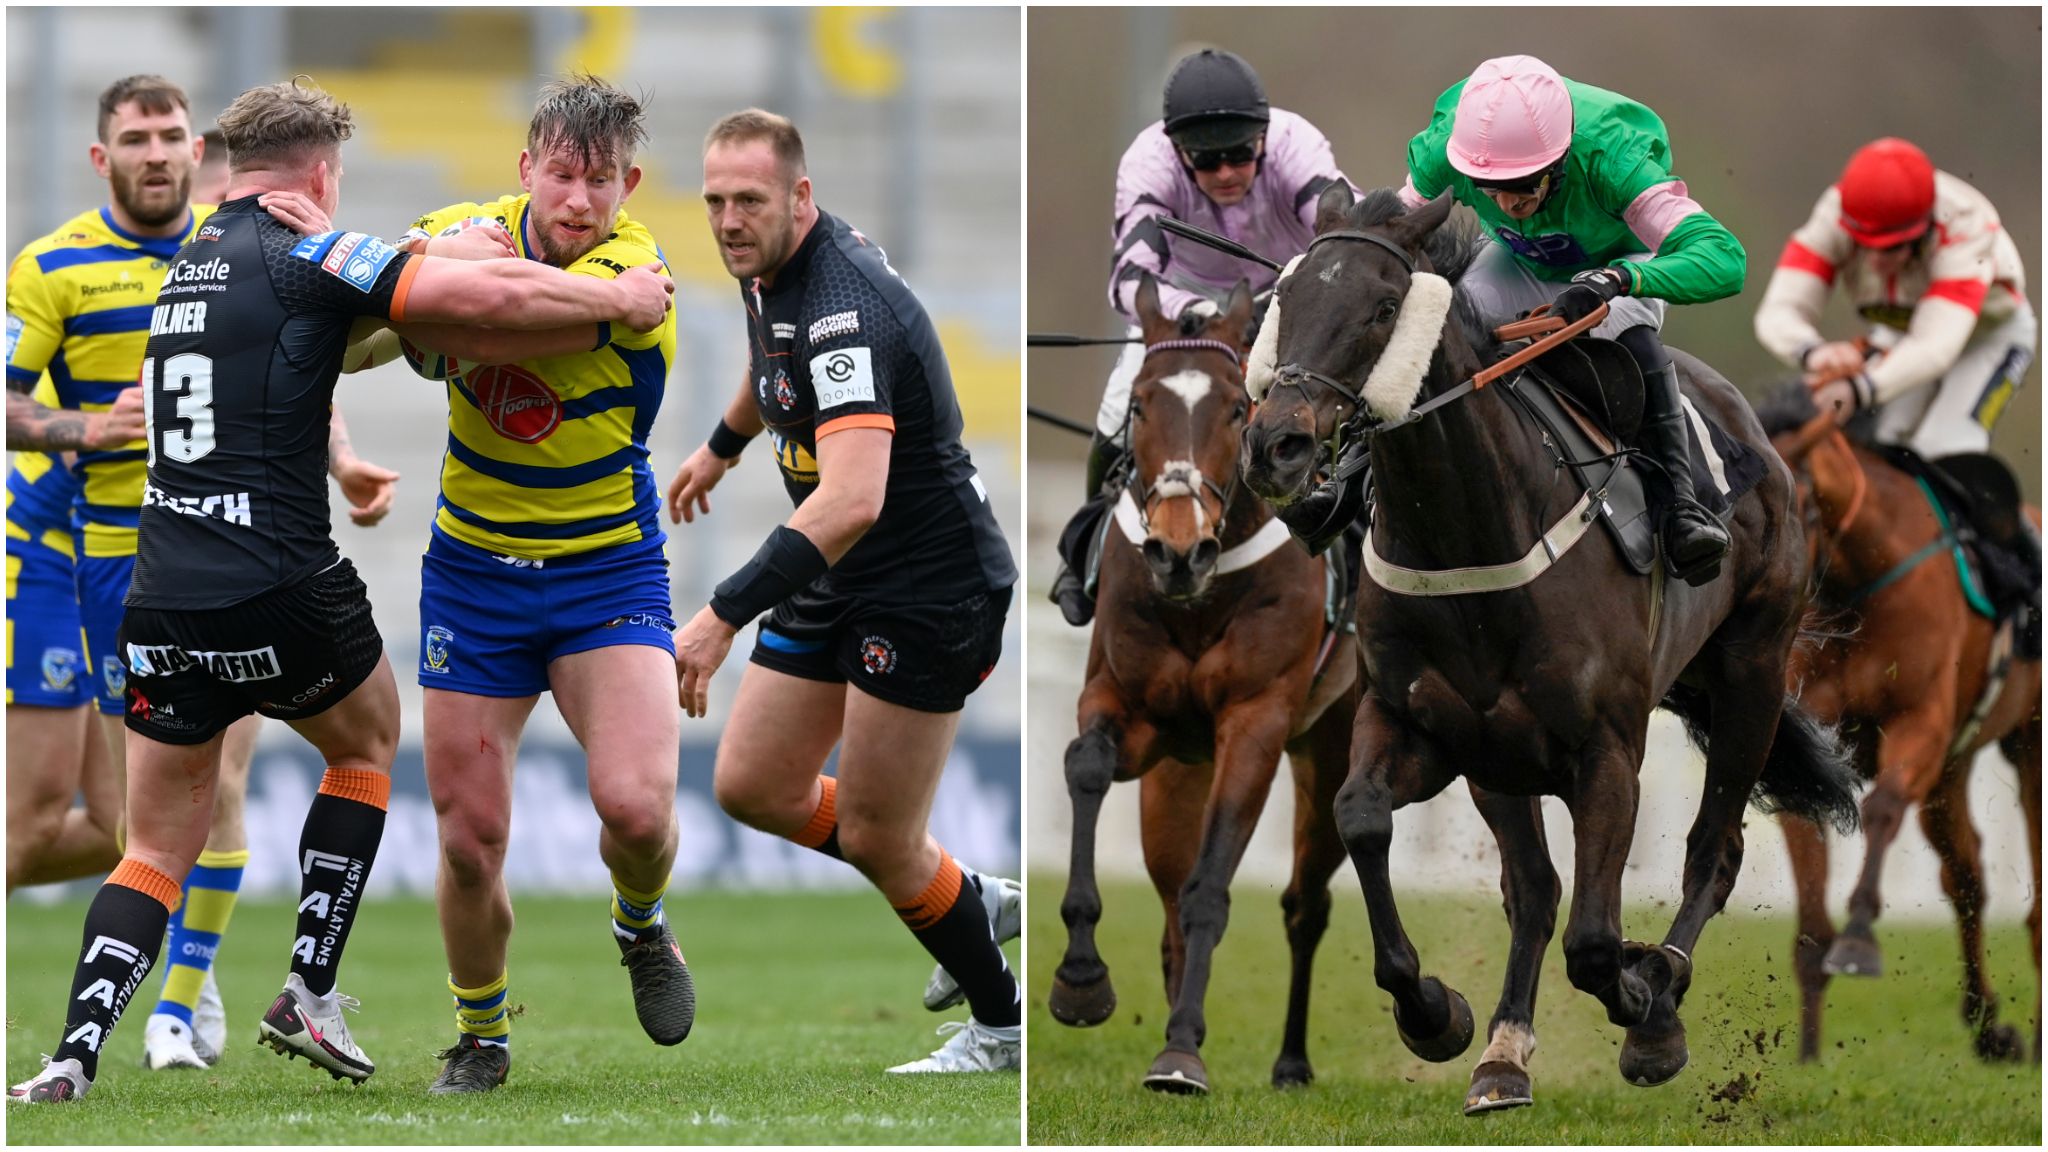 Rugby League and horse racing will both get loan support funding from the government